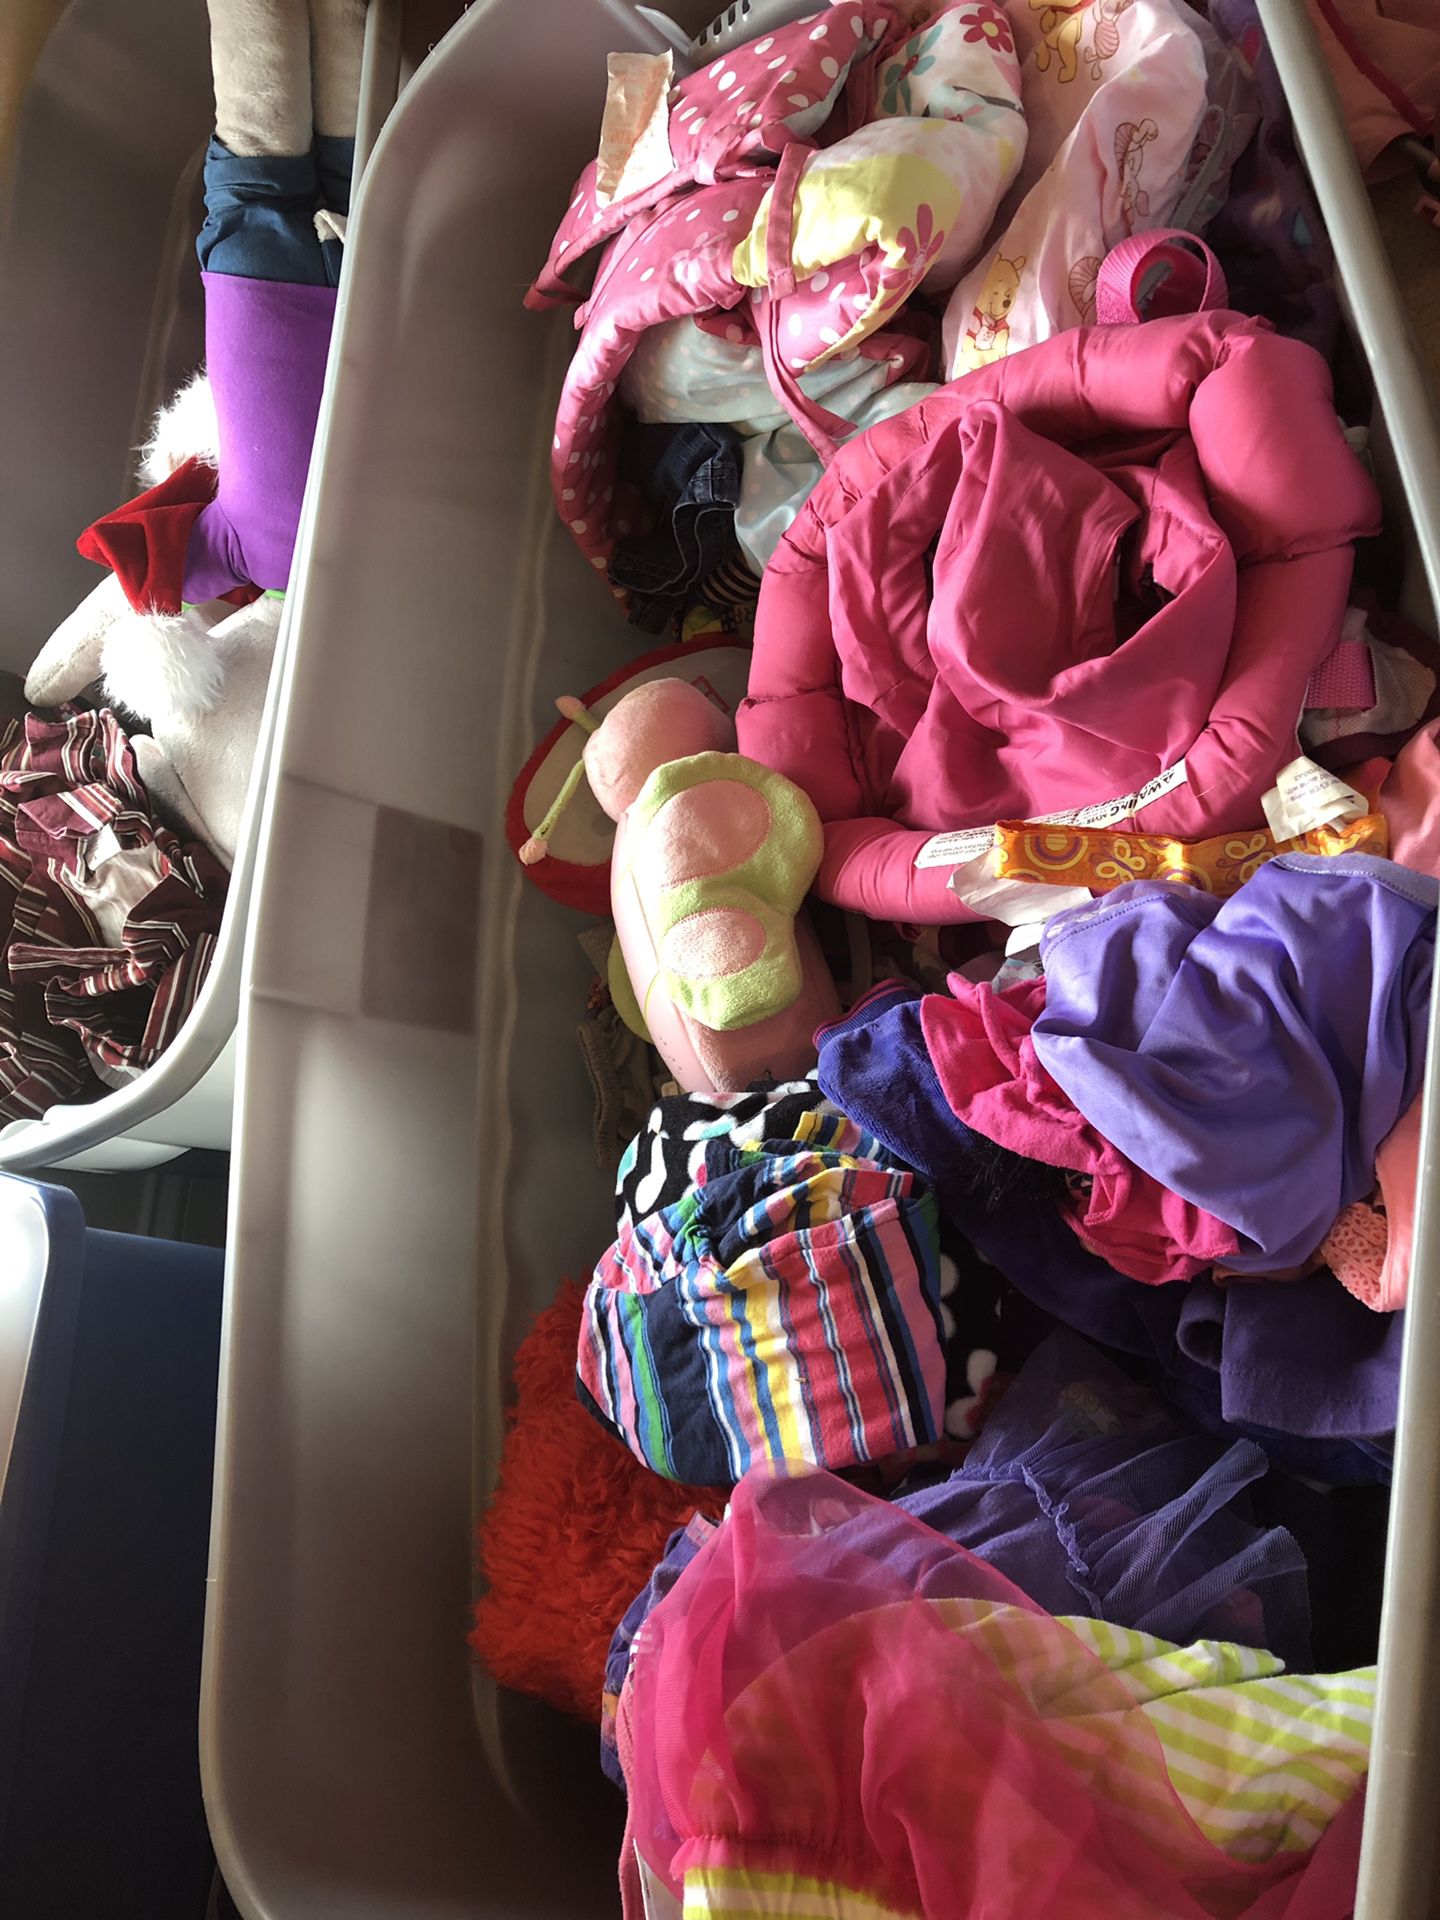 Bin of 12-2t girls clothes. Shoes With toys doorway bouncer